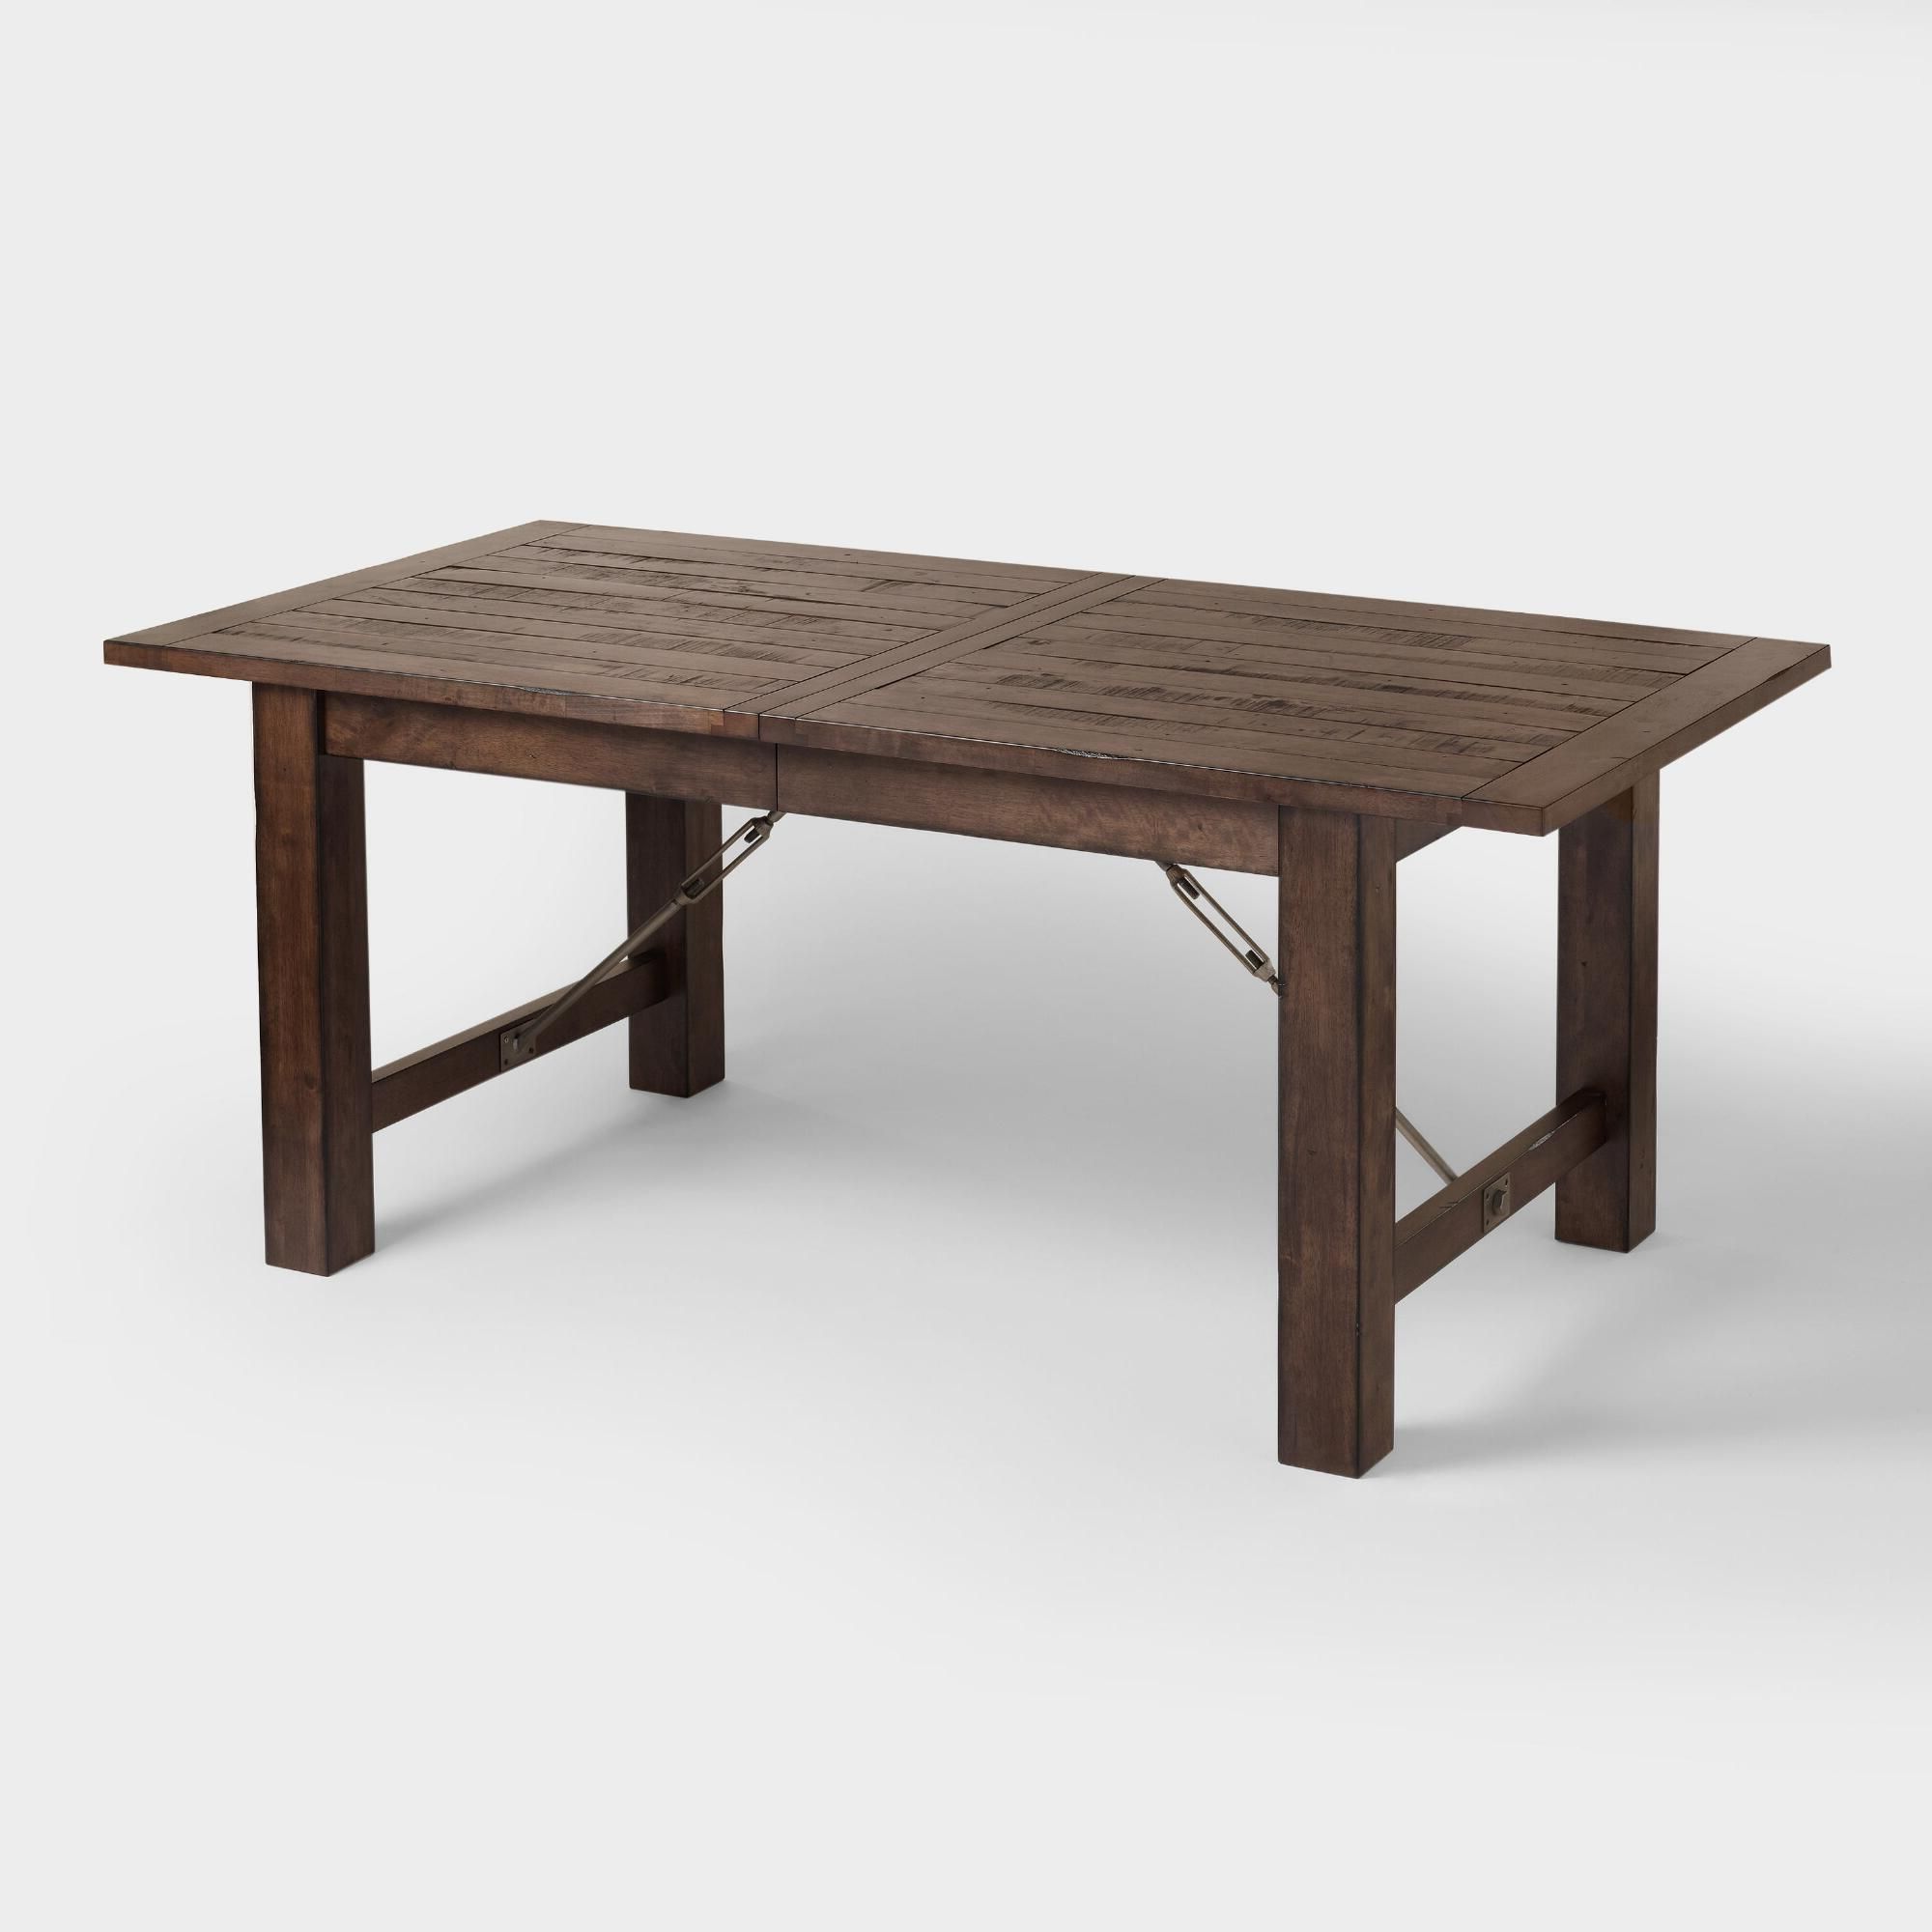 Famous Wood Garner Extension Dining Table: Brownworld Market In With Rustic Mahogany Extending Dining Tables (View 4 of 25)